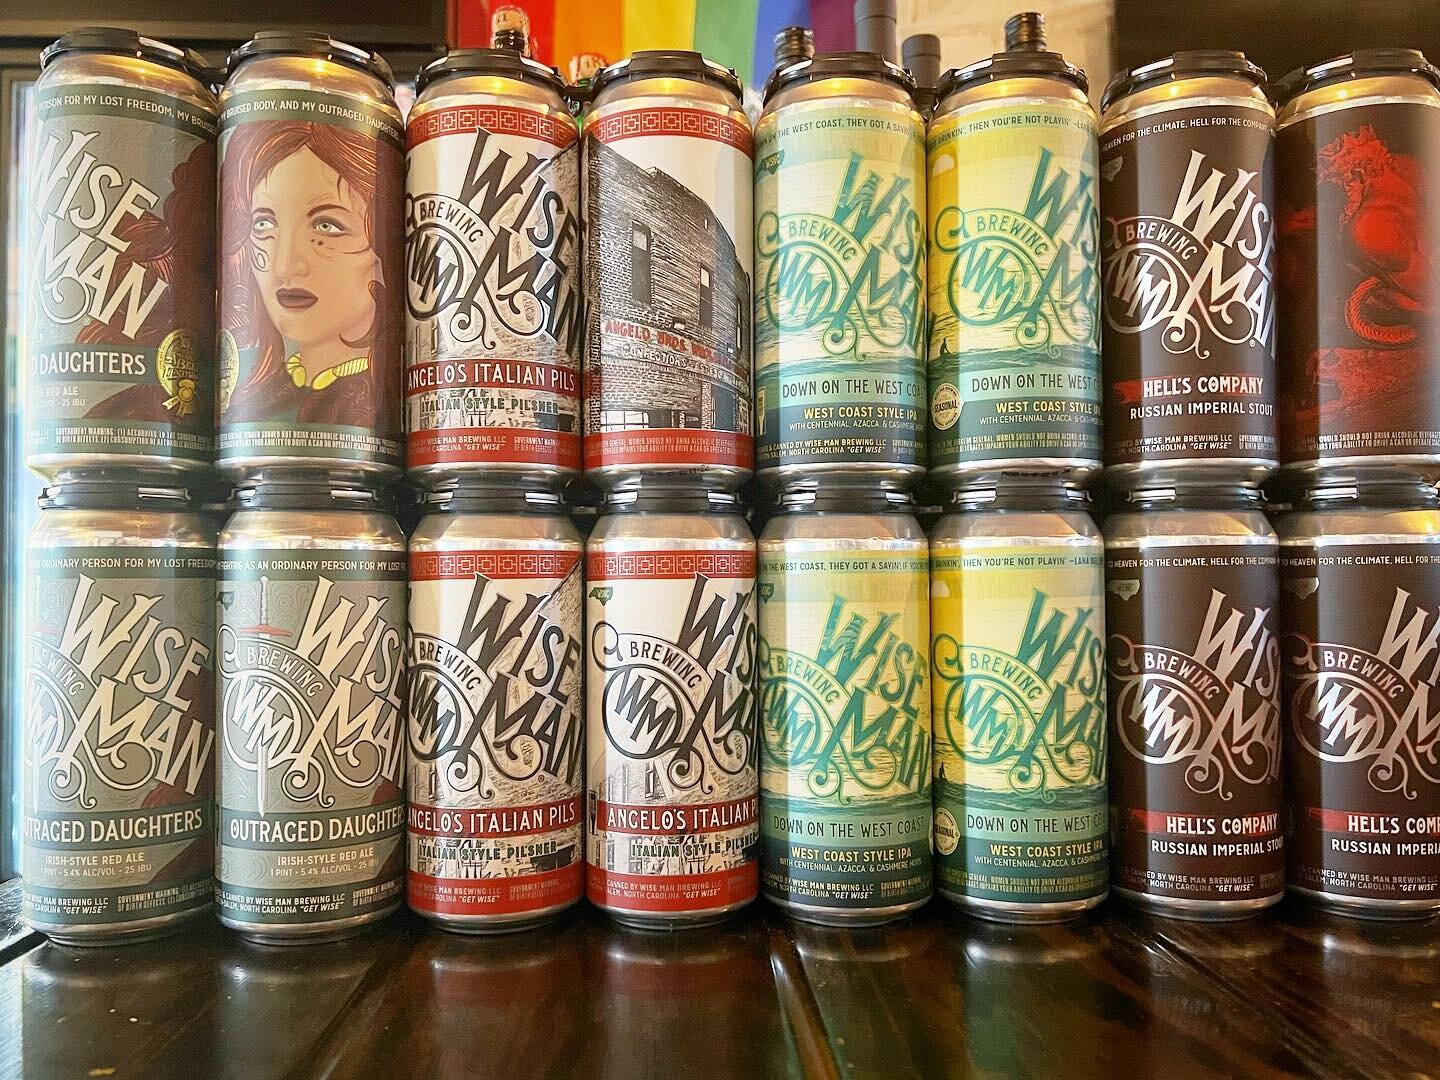 Happy Friday! Start your weekend off right with a free beer tasting featuring some of the latest offerings from @wisemanbeer 🍻
The fun starts at 5pm. Come on through!

#helloweekend #beerfordinner 
#plazamidwood